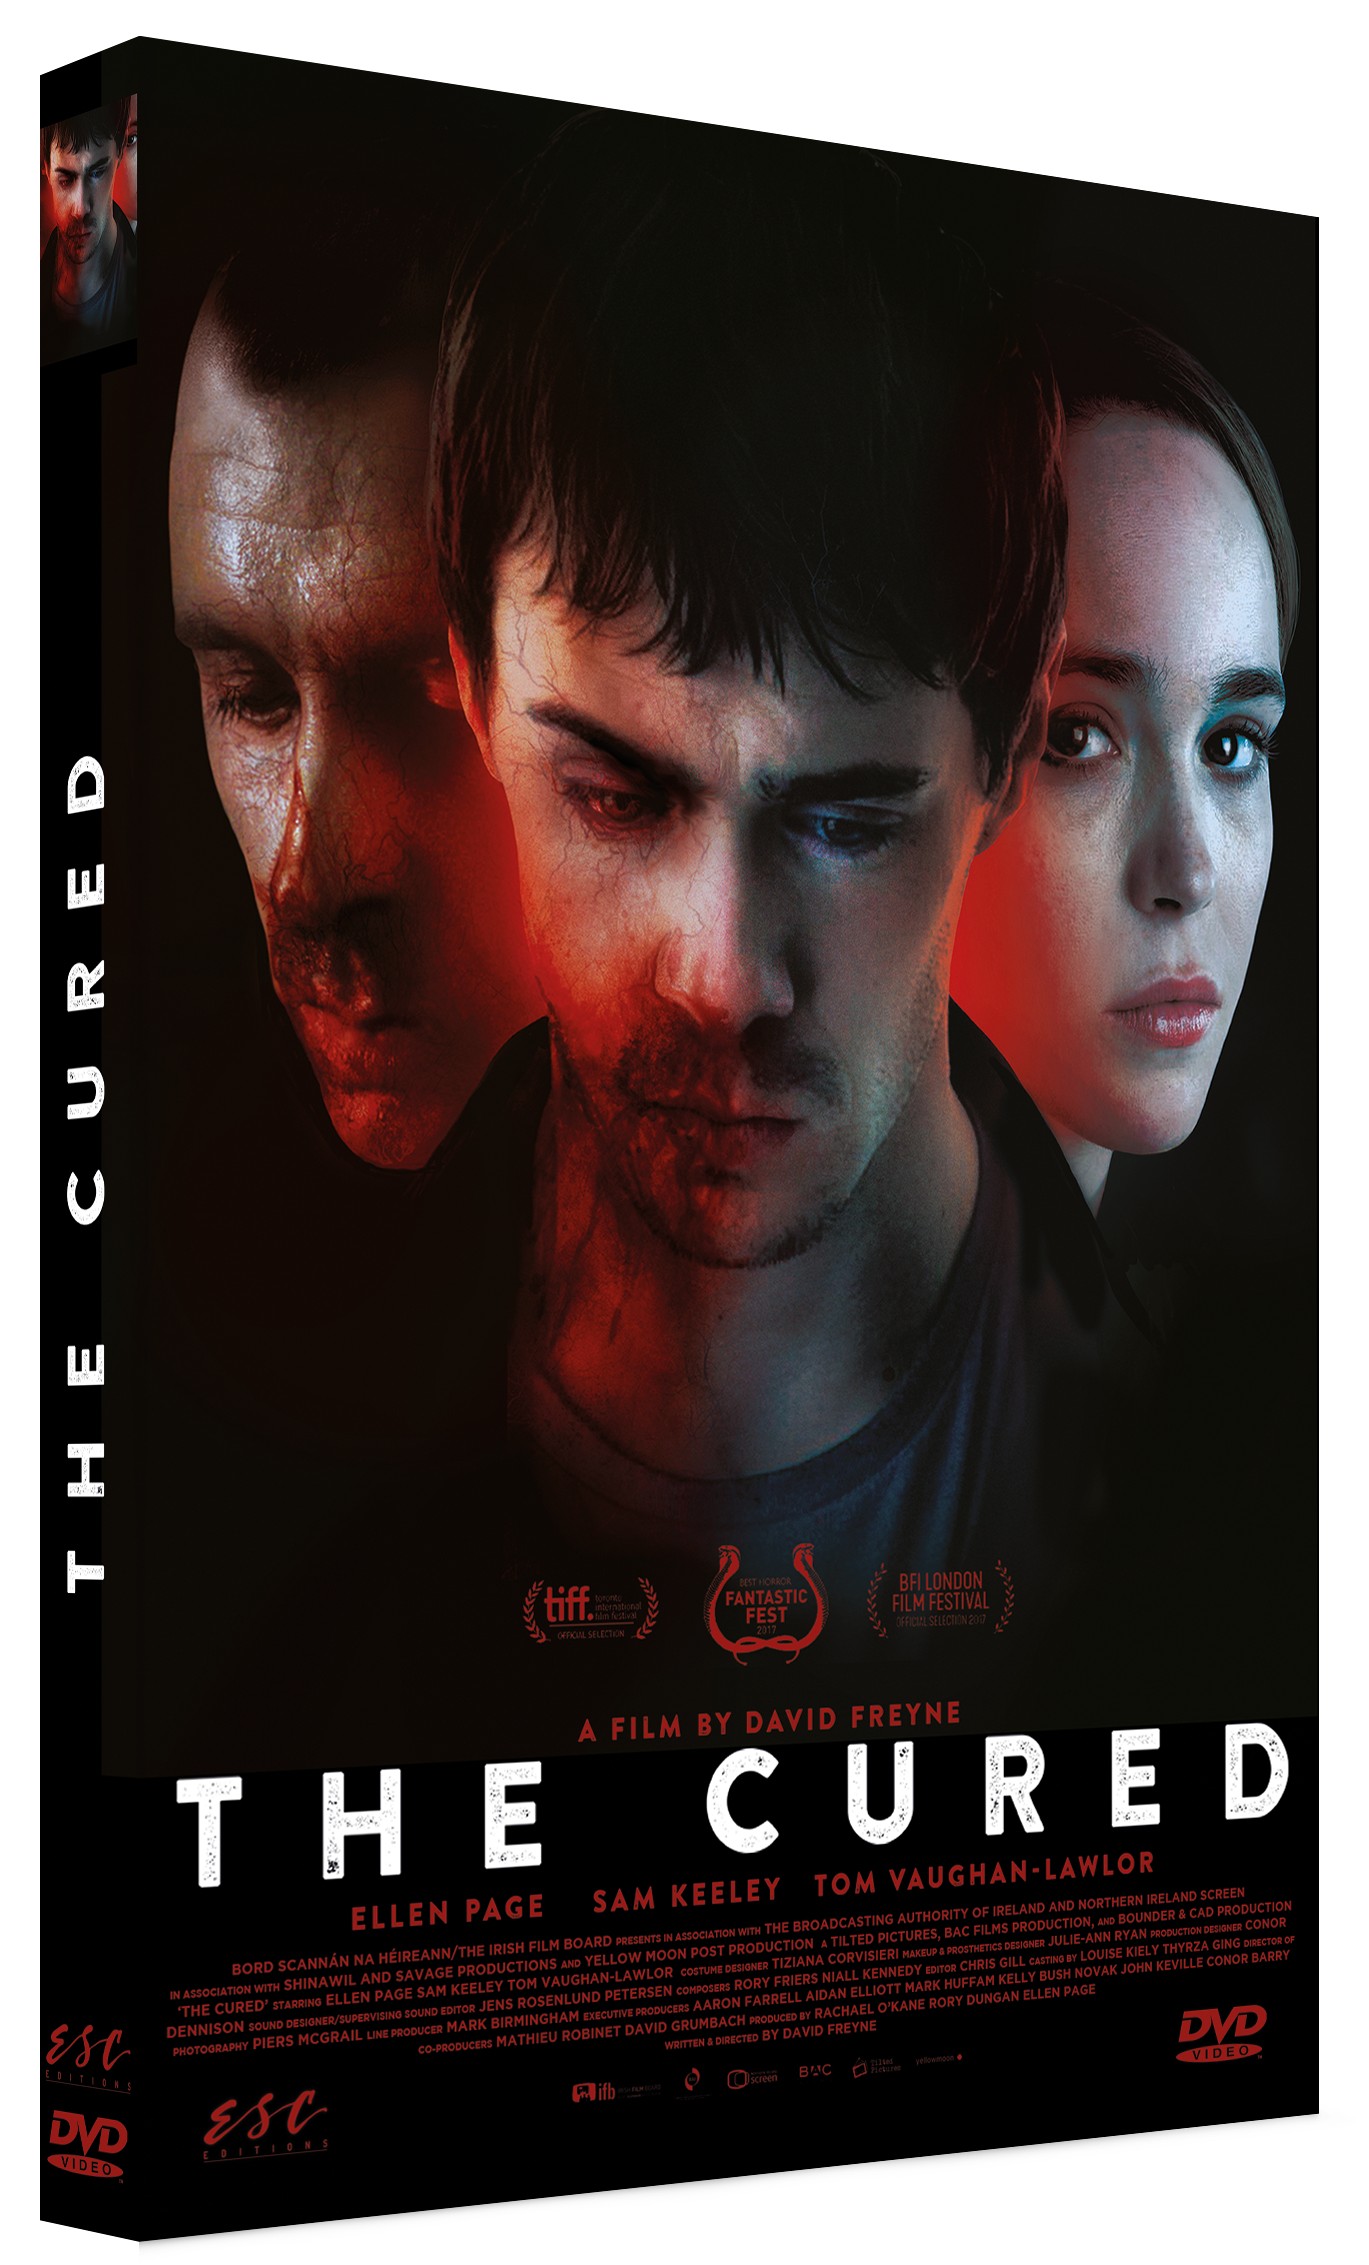 THE CURED